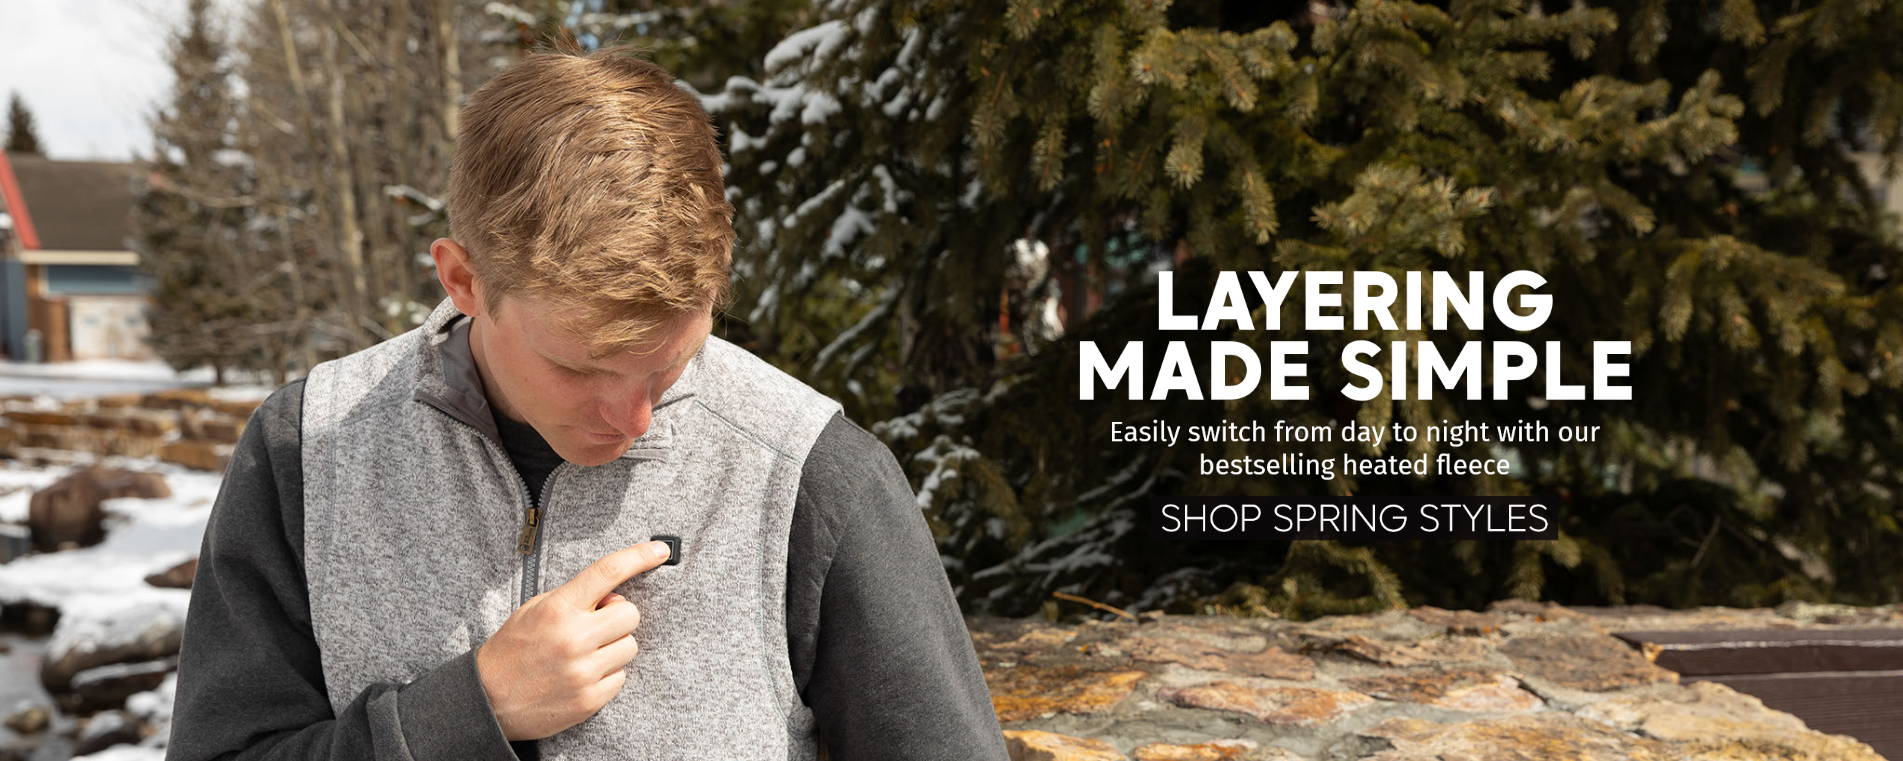 man pressing button on venture heat heated vest. layering made simple